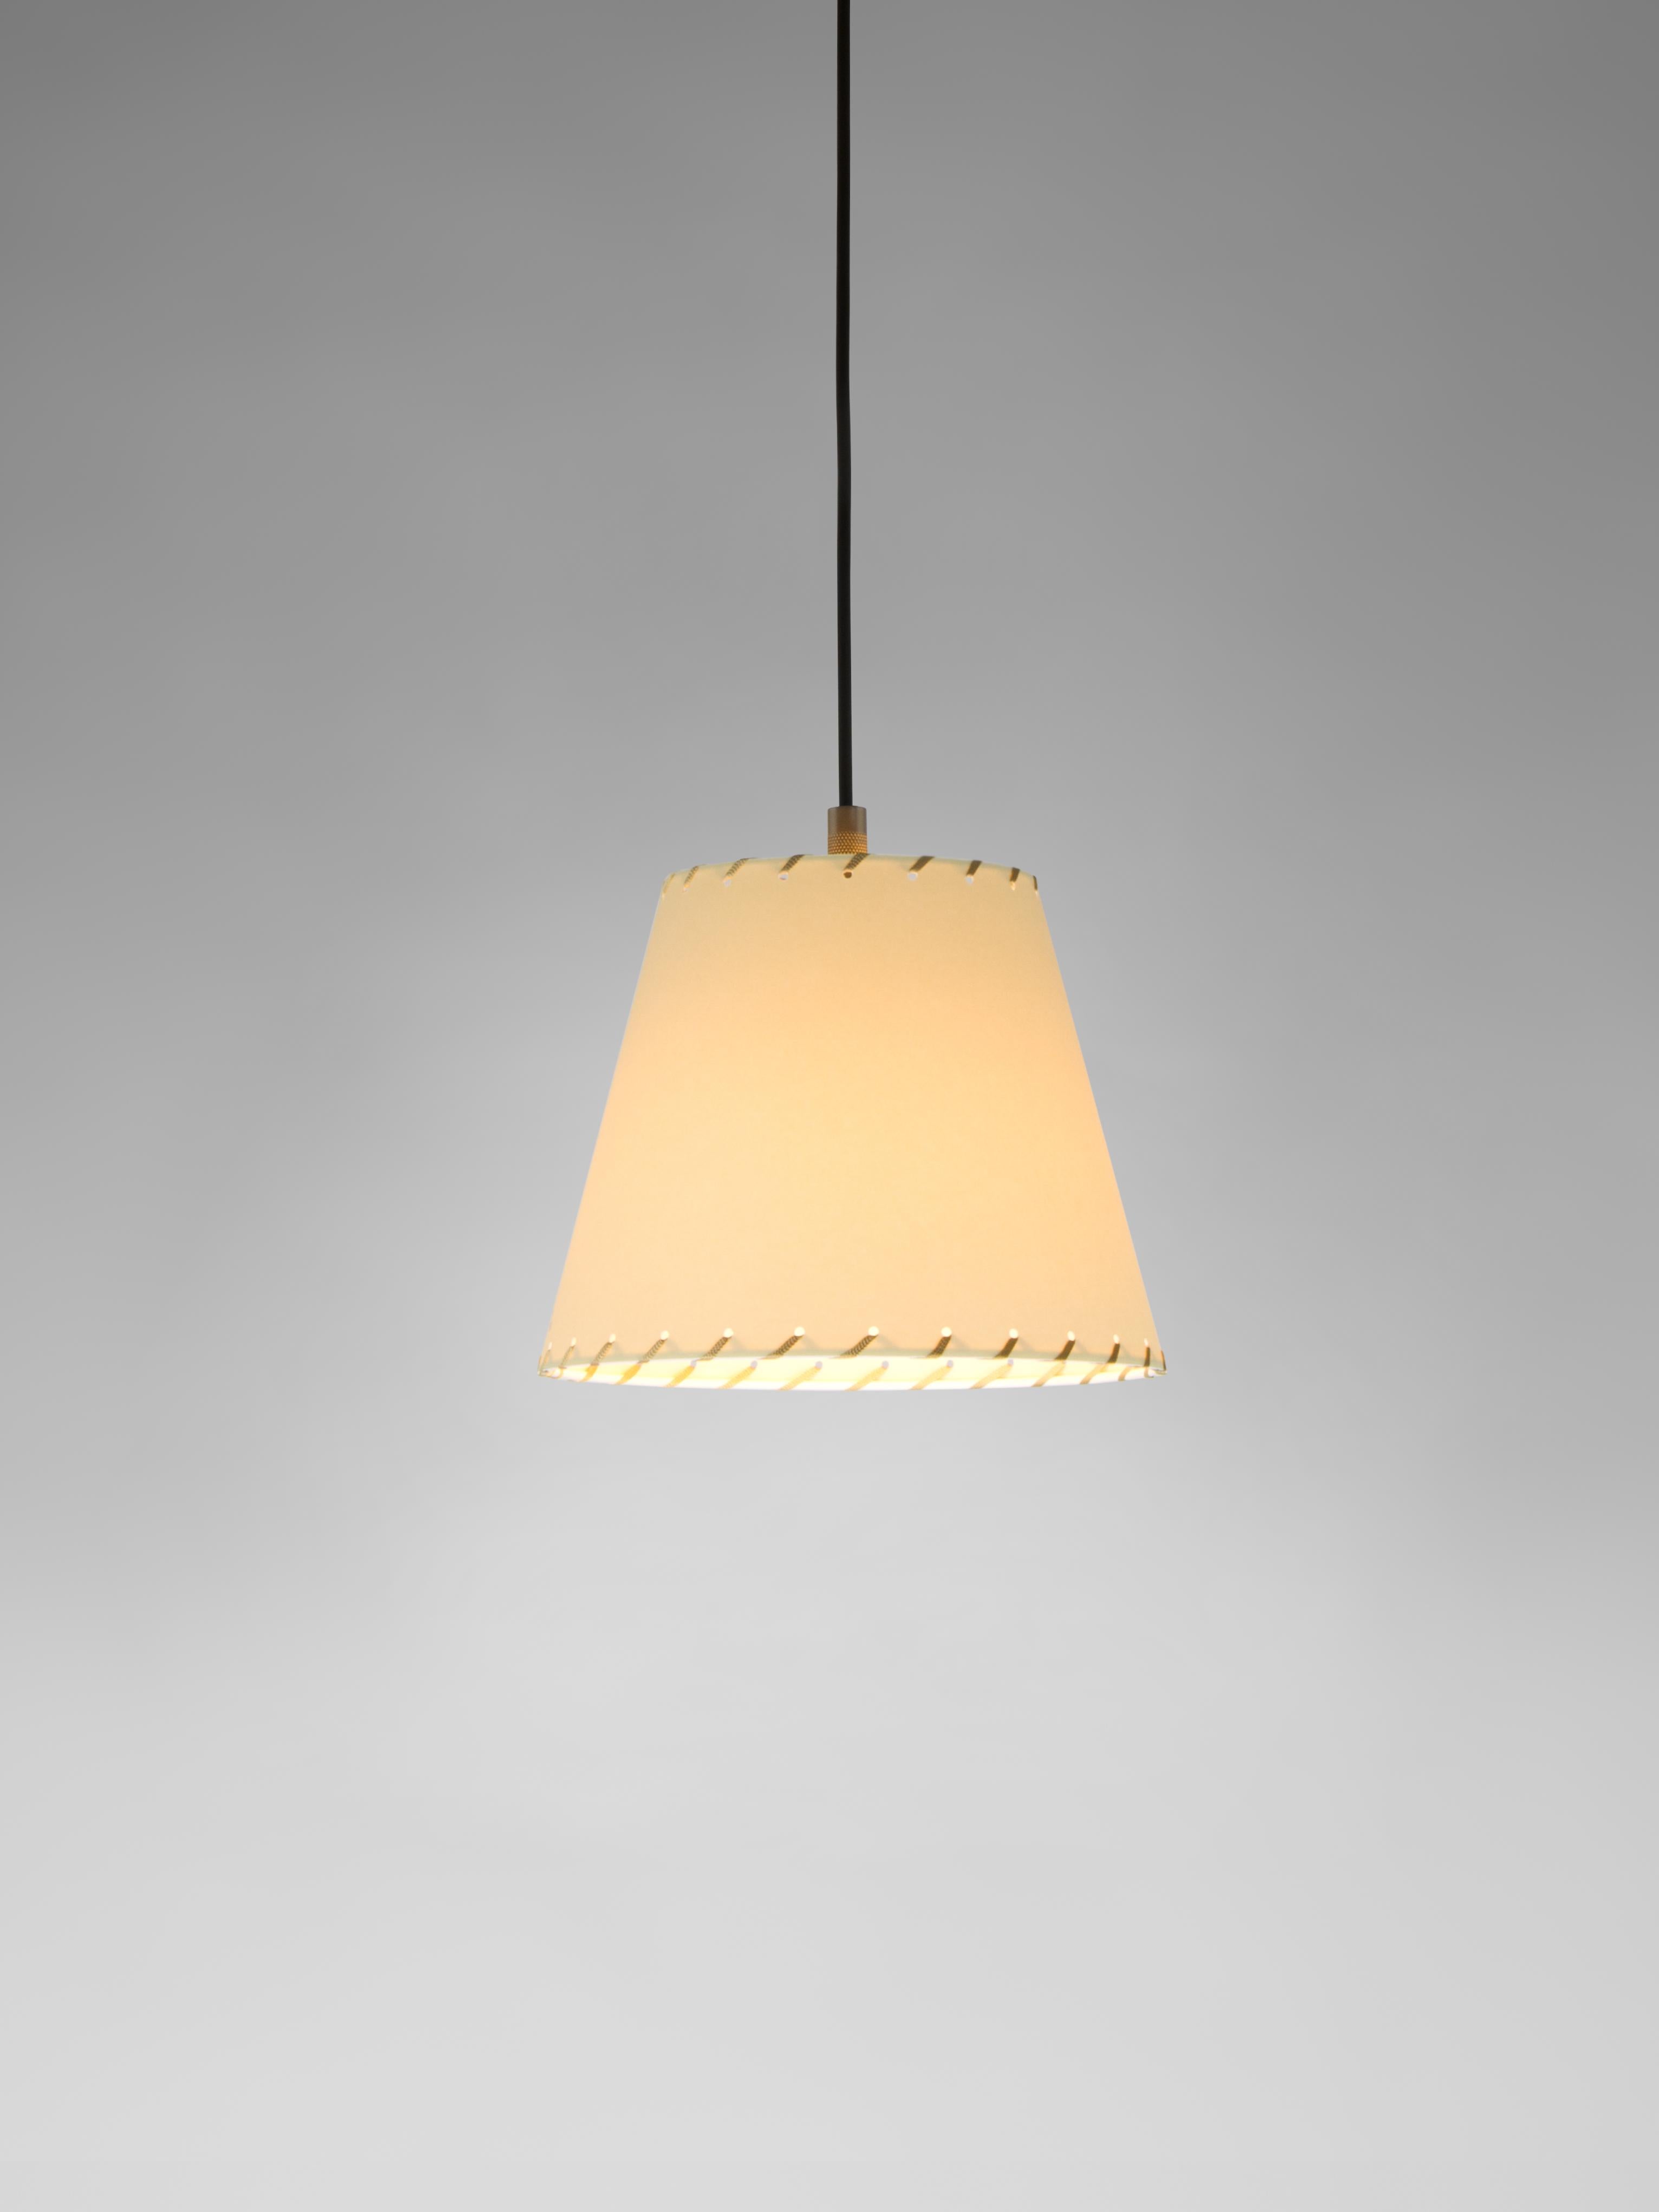 Beige sísísí cónicas PT1 pendant lamp by Santa & Cole
Dimensions: D 20 x H 16 cm
Materials: Metal, stitched parchment.
Available in other colors.

The conical shape group has multiple finishes and sizes. It consists of four sizes: PT1, MT1, GT1